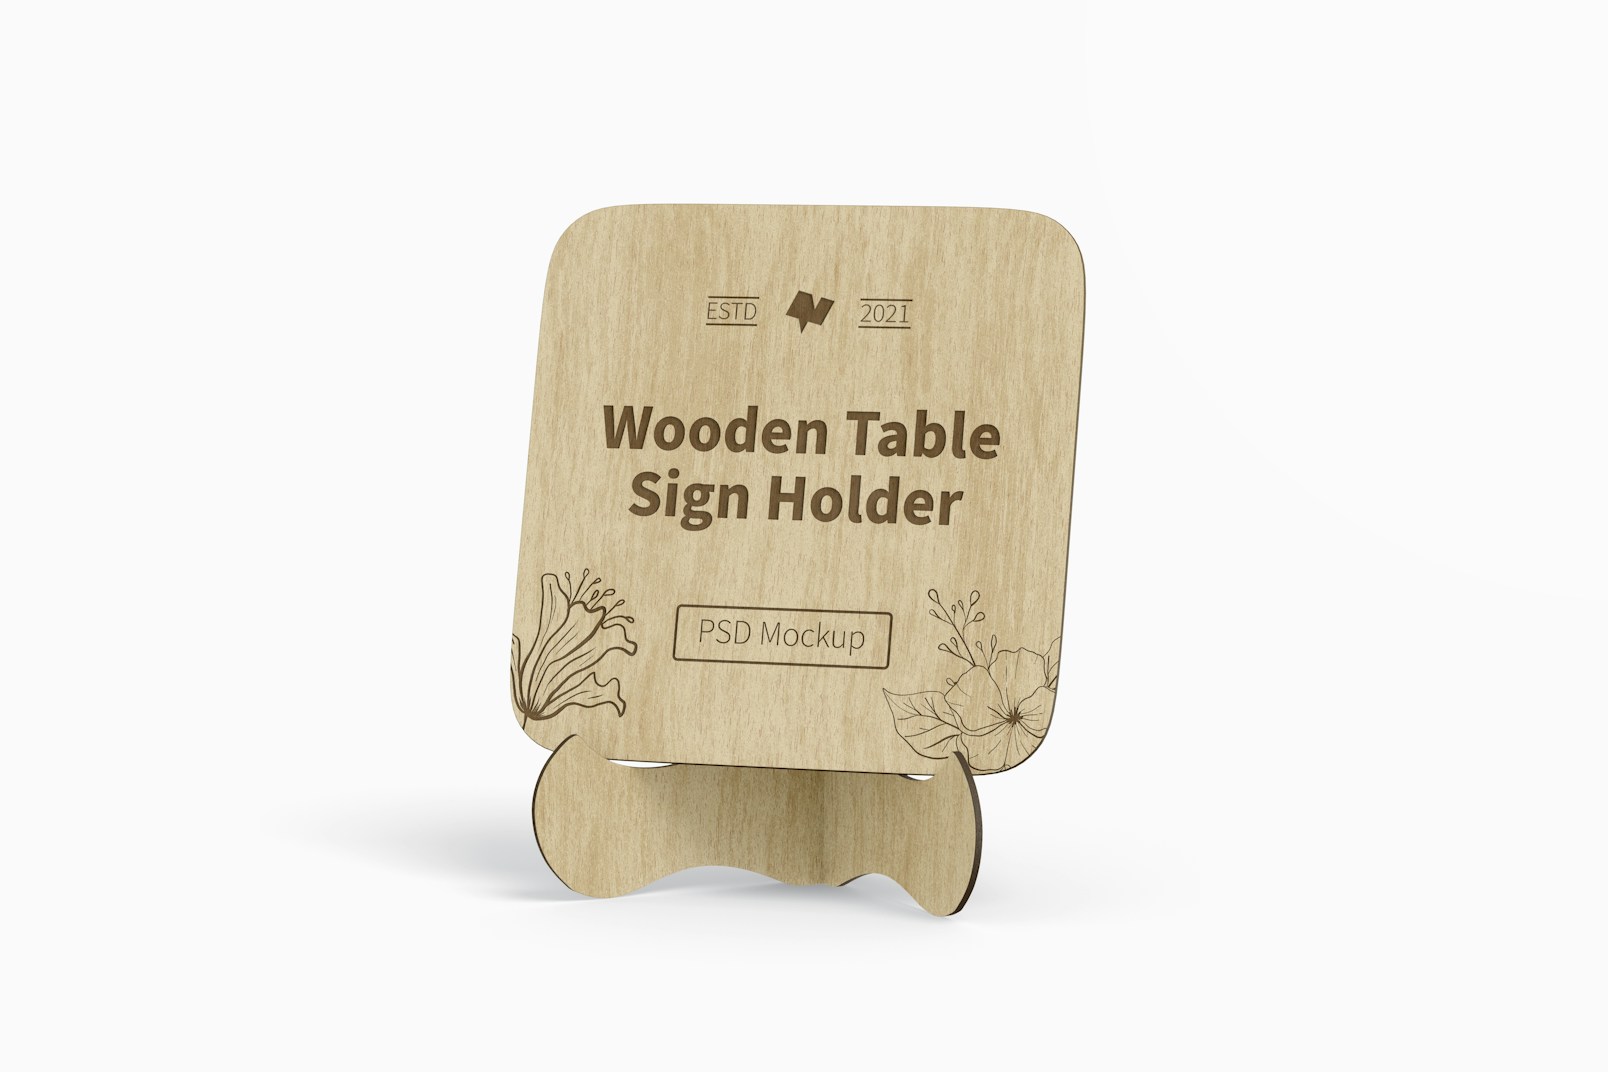 Wooden Table Sign Holder Mockup, Front View